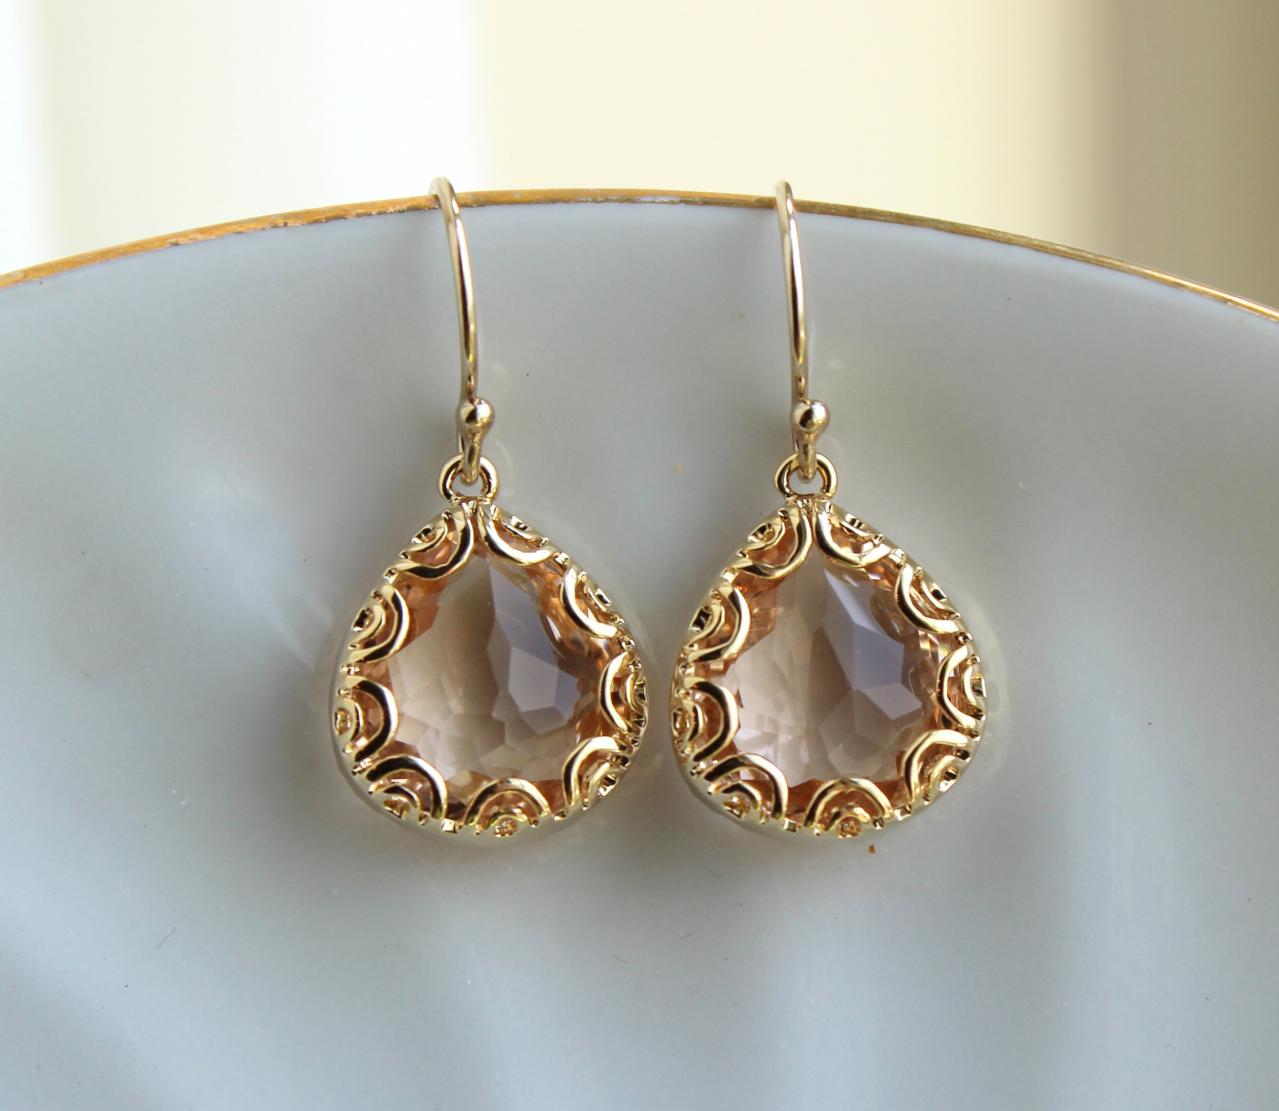 Gold Champagne Blush Earrings Peach Pink Jewelry - Pear Shaped Gold Design - Gold Blush Bridesmaid Earrings Champagne Peach Wedding Earrings